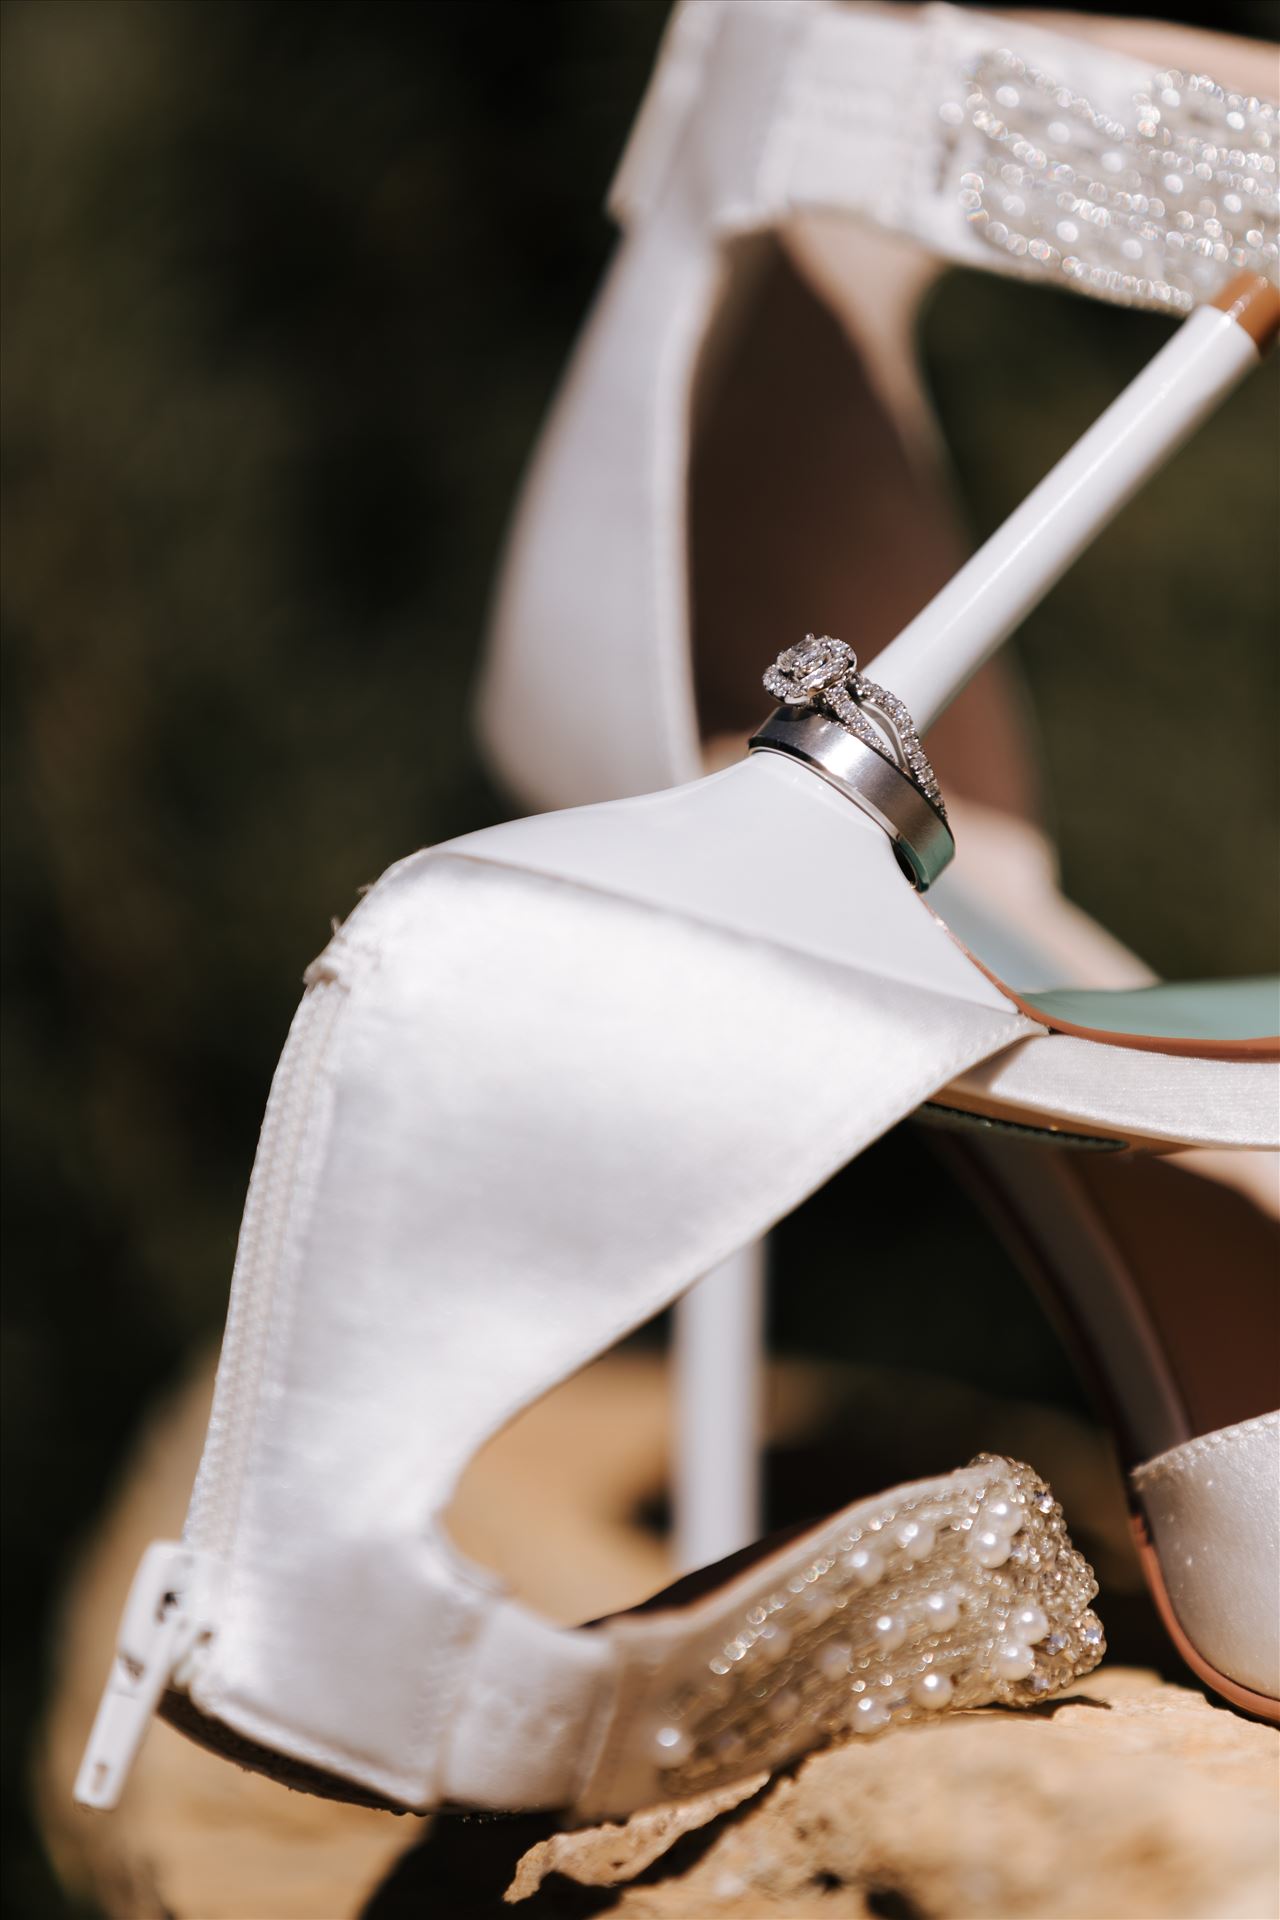 _Y9A6433.JPG Tooth and Nail Winery elegant and formal wedding in Paso Robles California wine country by Mirror's Edge Photography, San Luis Obispo County Wedding Photographer. Bridal shoes and wedding rings by Sarah Williams